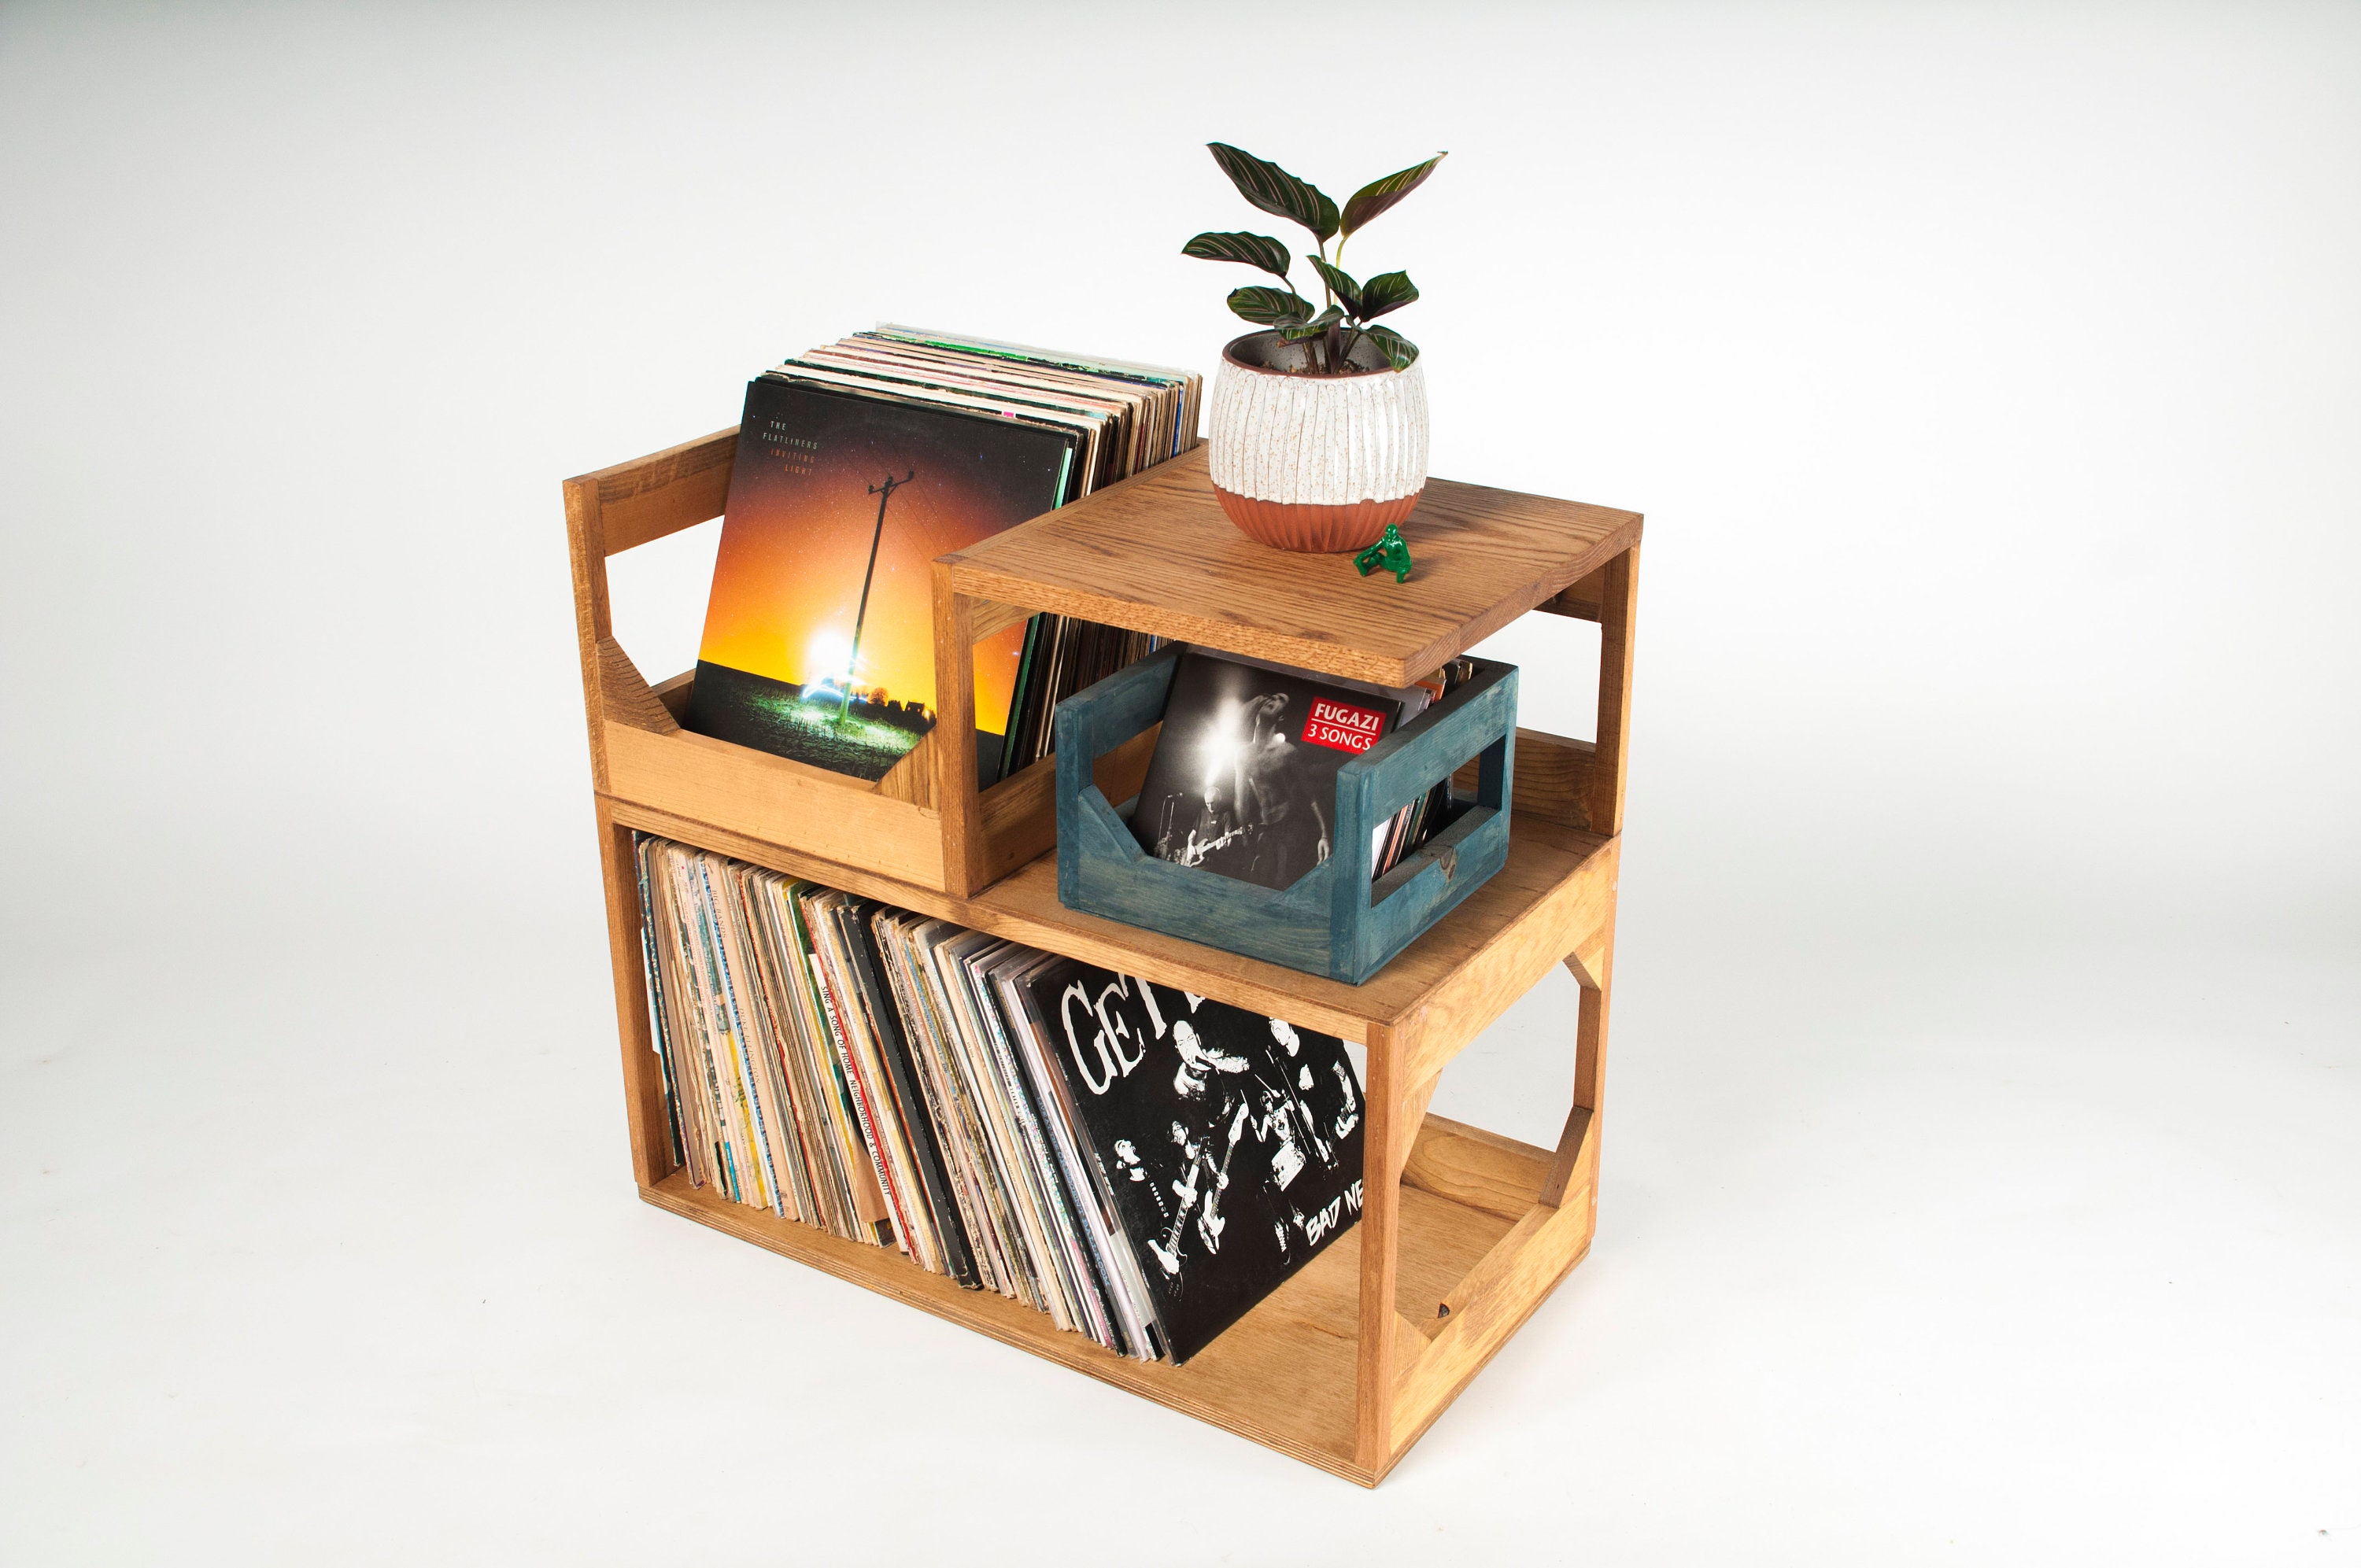 Wood Look Accent Furniture with Metal Frame NXN-HOME Industrial Side Table Record Player Stand with Storage Shelf for Coffee Books Magazines